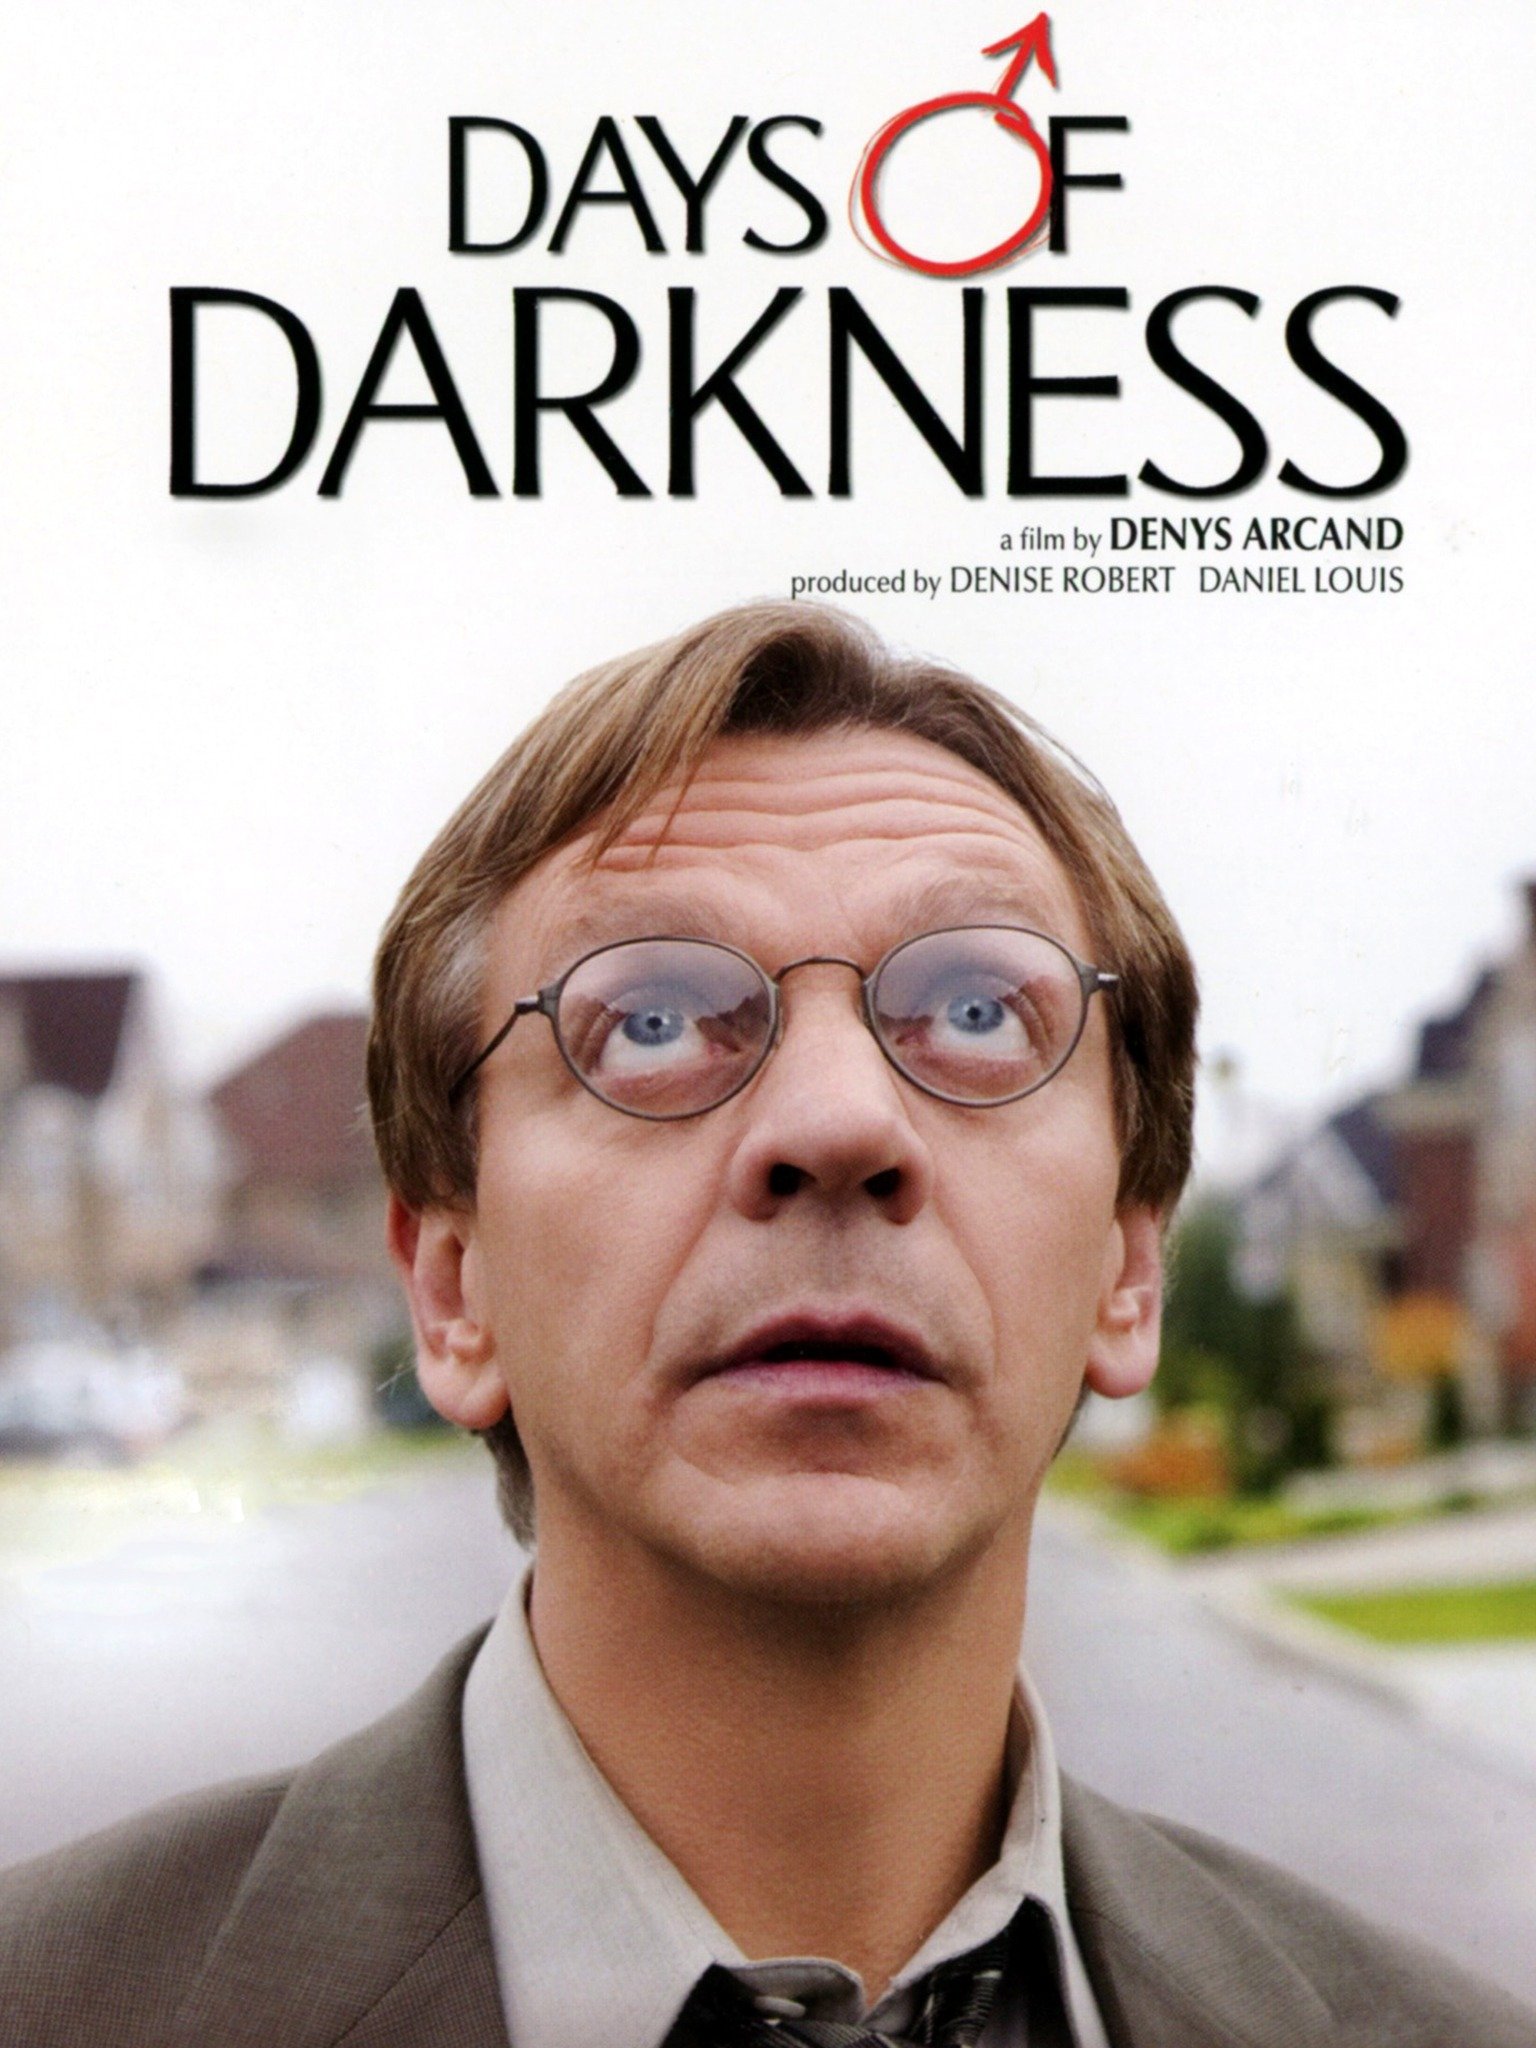 Days of Darkness (2007) Rotten Tomatoes